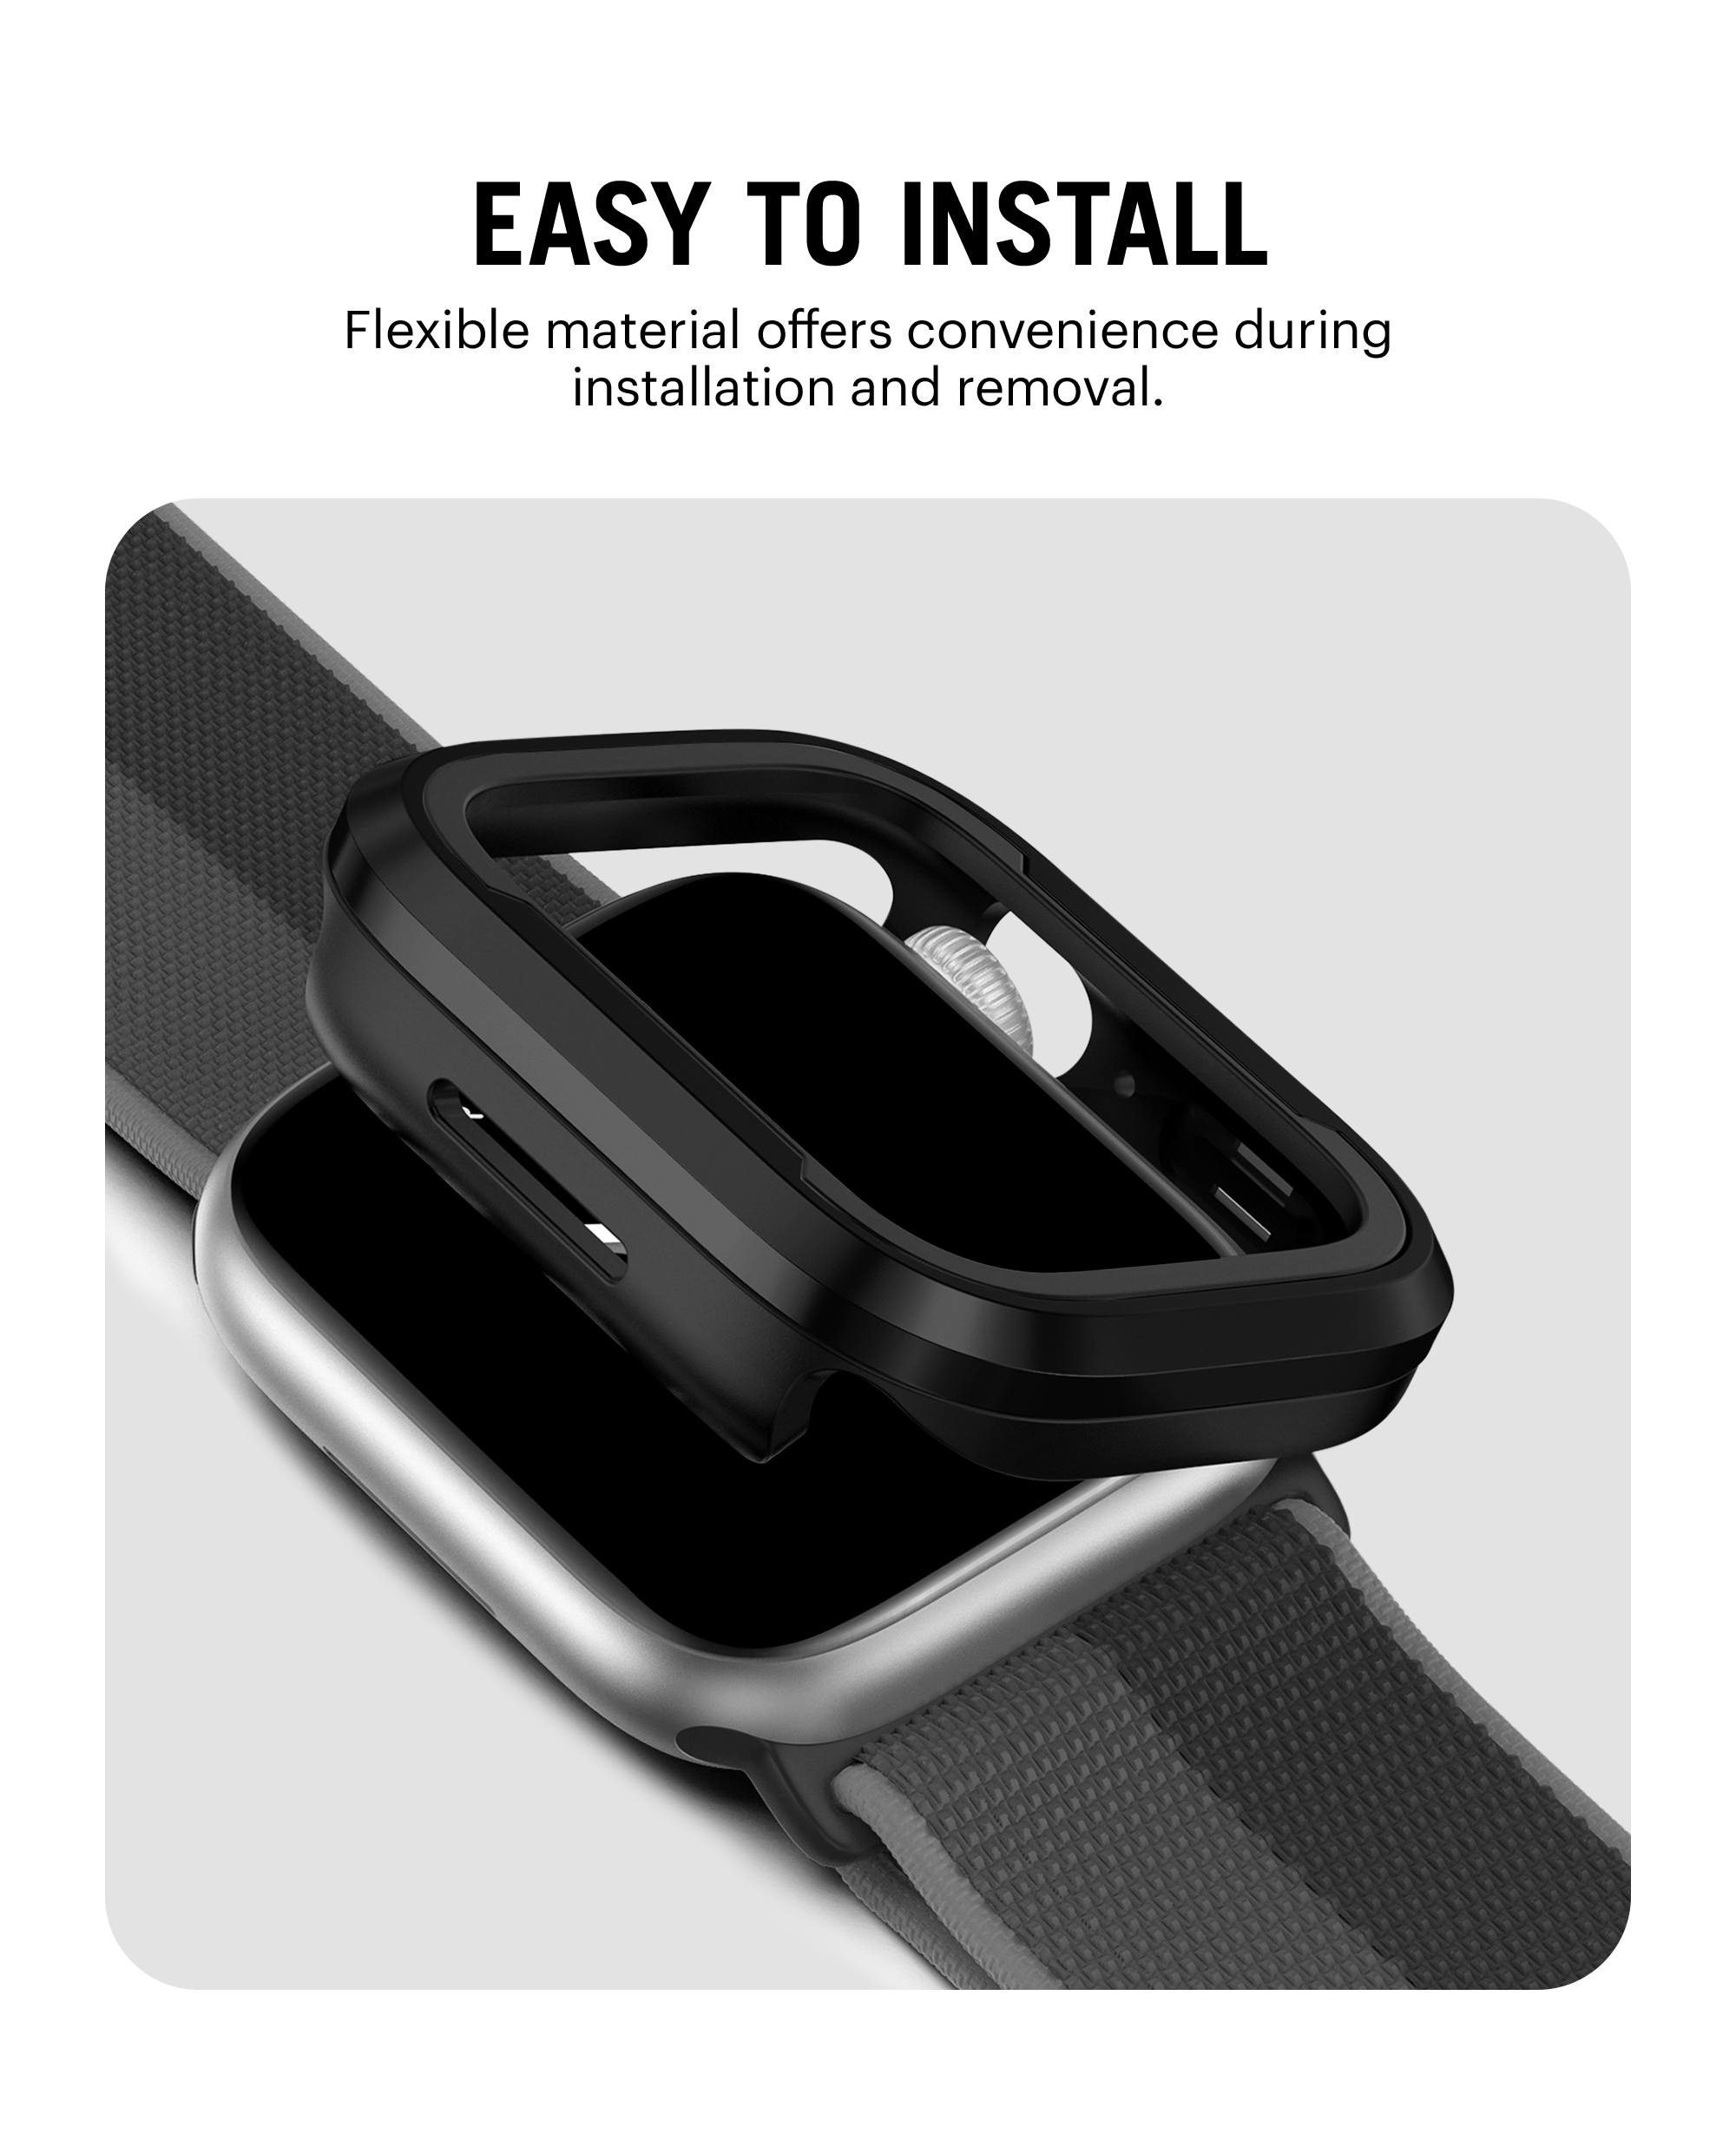 Amazon.com: Apple Watch Series 4 (GPS, 44MM) - Space Gray Aluminum Case  with Black Sport Band (Renewed) : Electronics